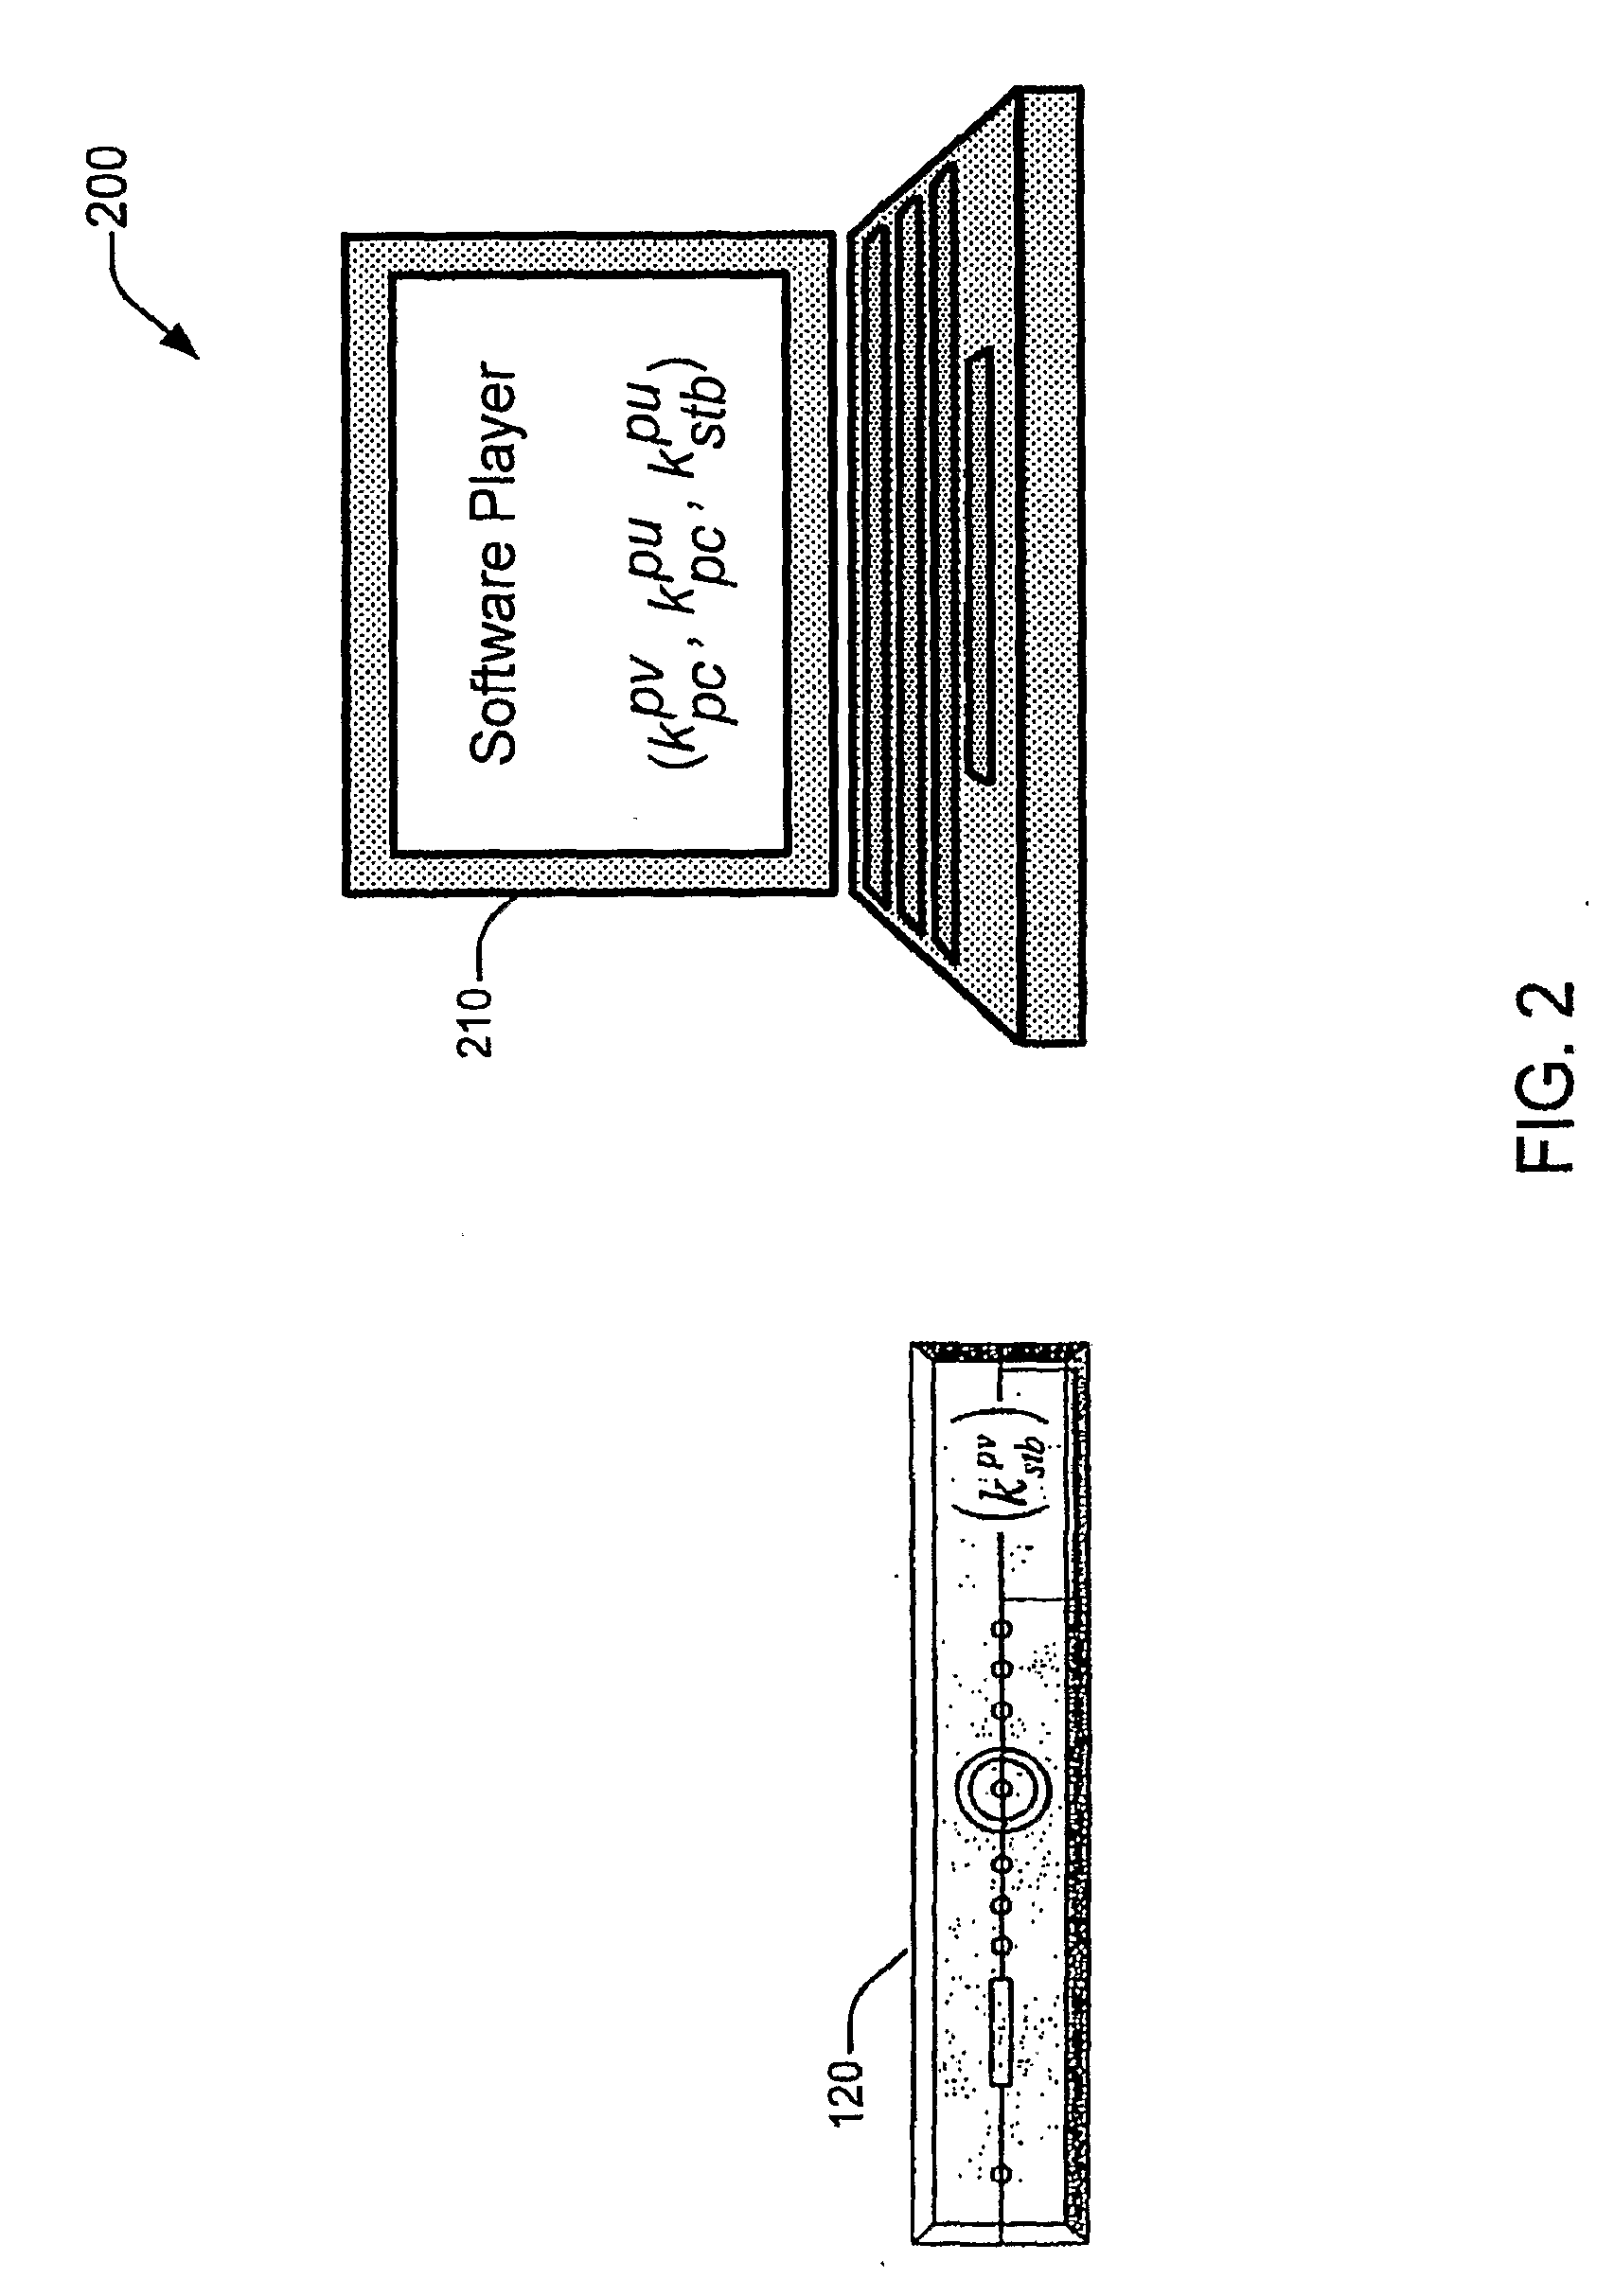 Method, Apparatus and System for Secure Distribution of Content